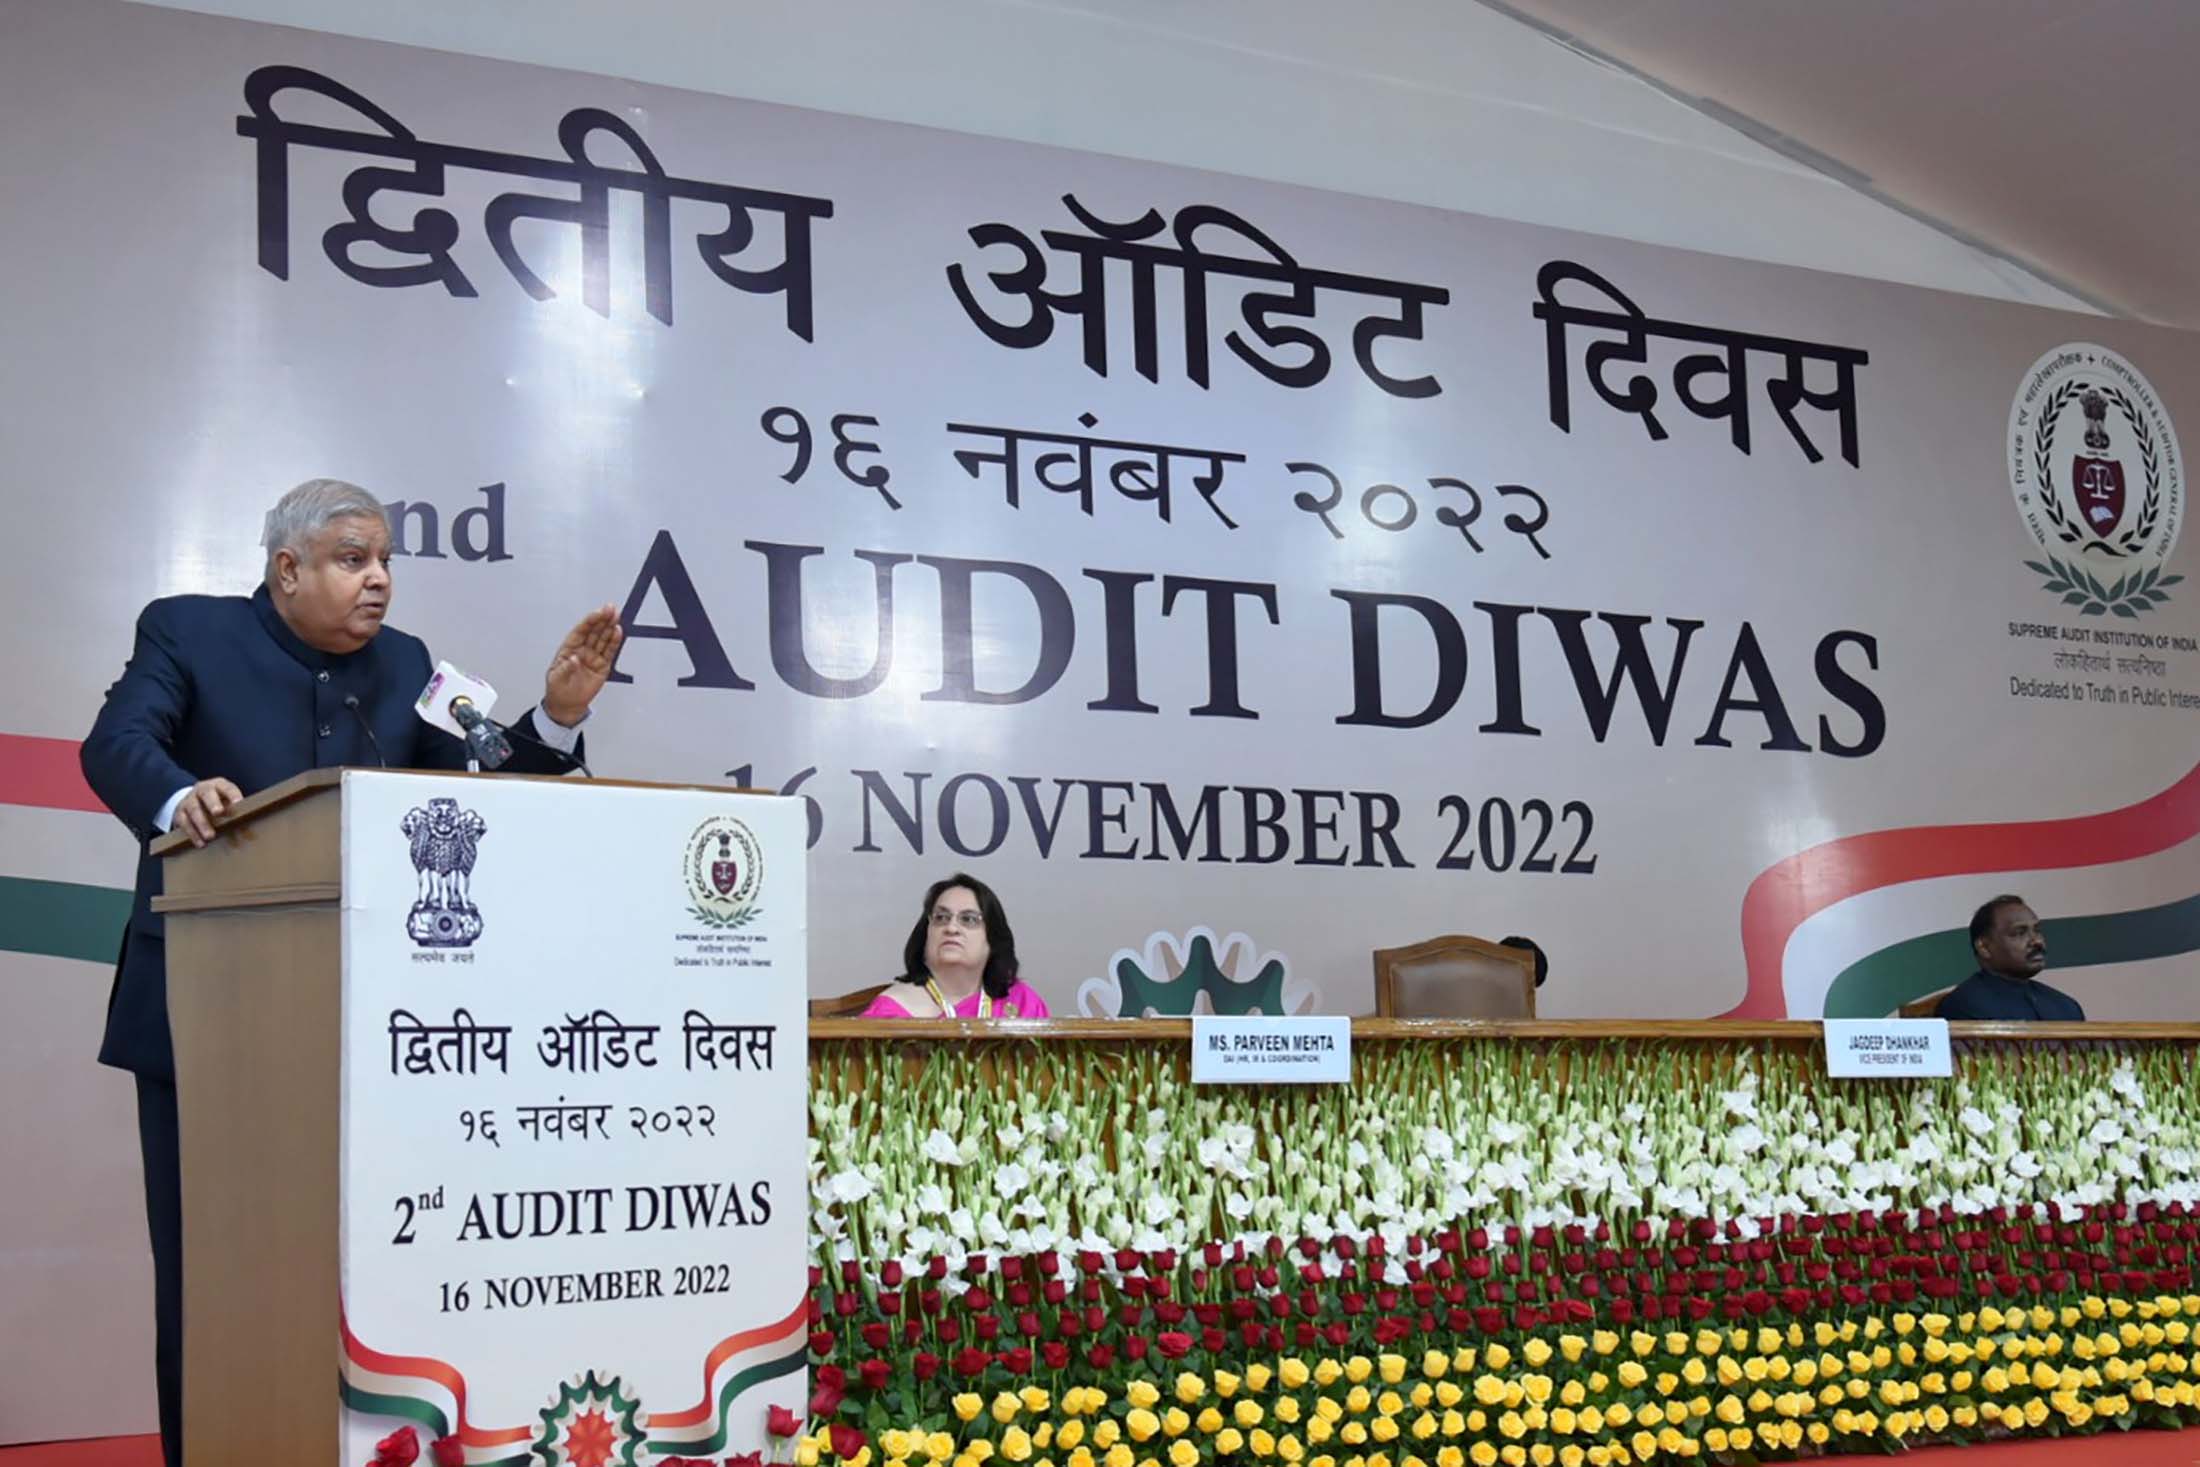 The Vice President, Shri Jagdeep Dhankhar during the 2nd Audit Diwas celebrations at CAG office in New Delhi on November 16, 2022.